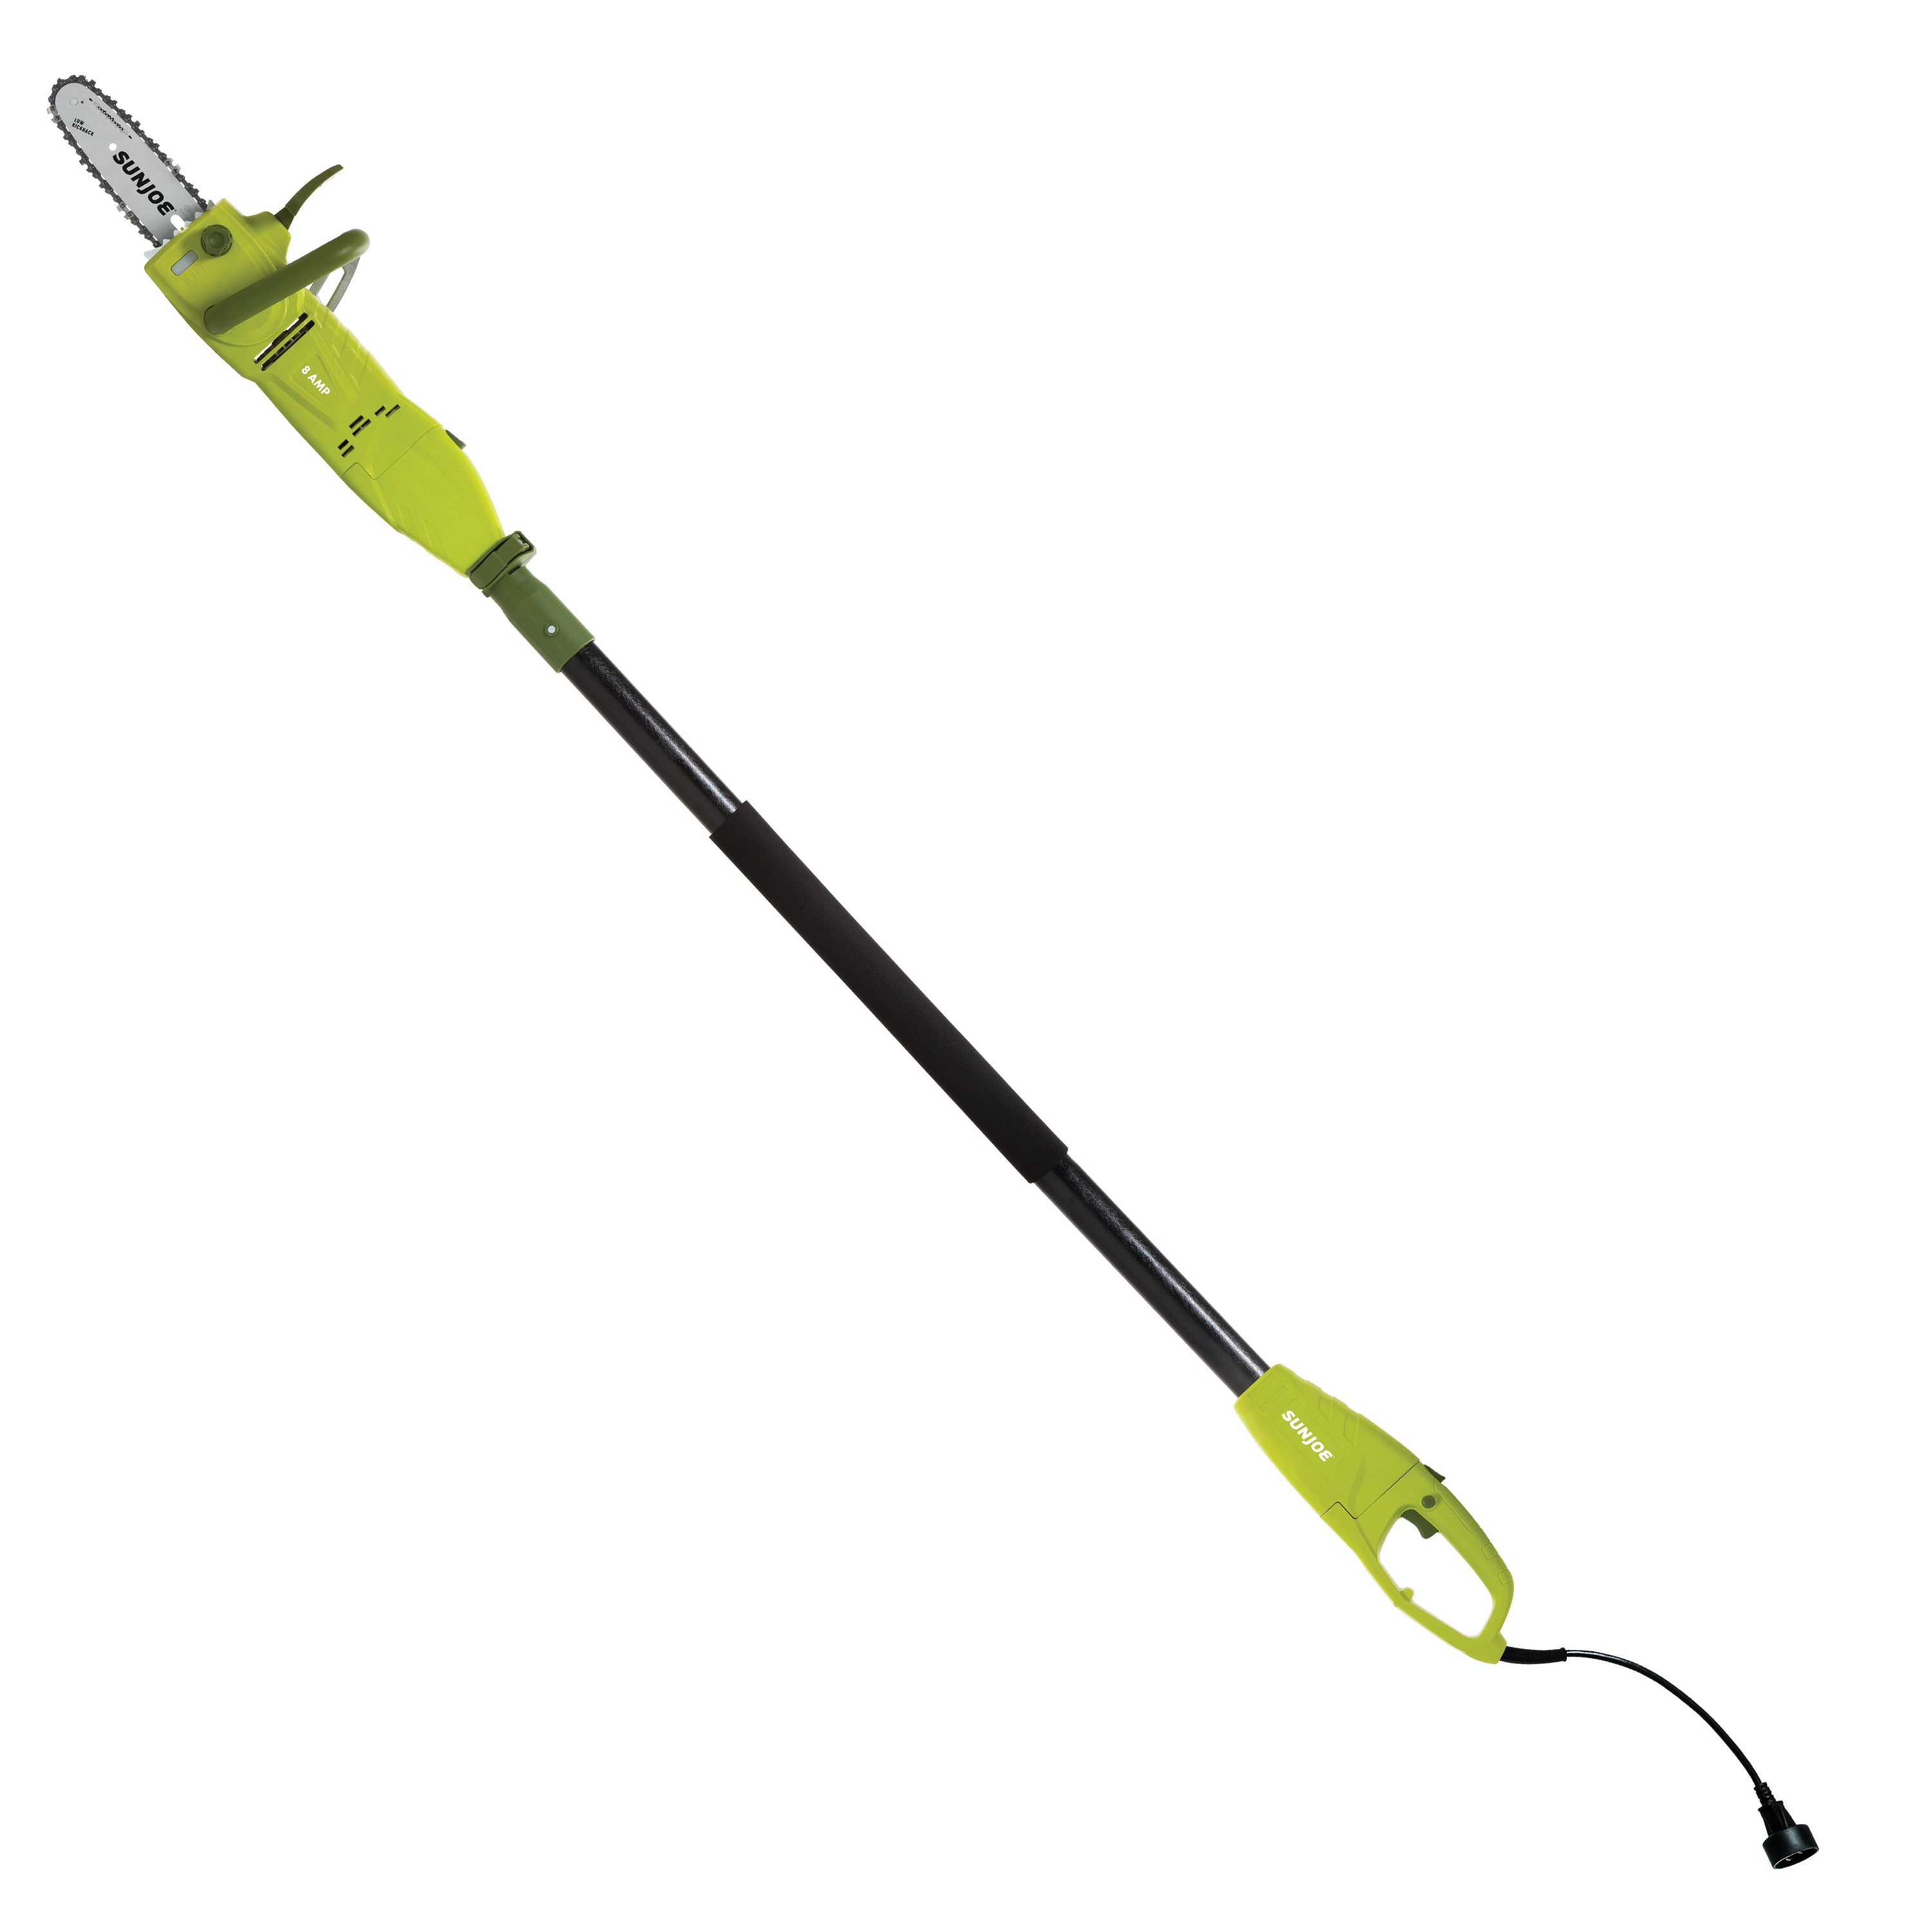 8-in 8-Amp Electric Telescoping Pole Saw + Chain Saw